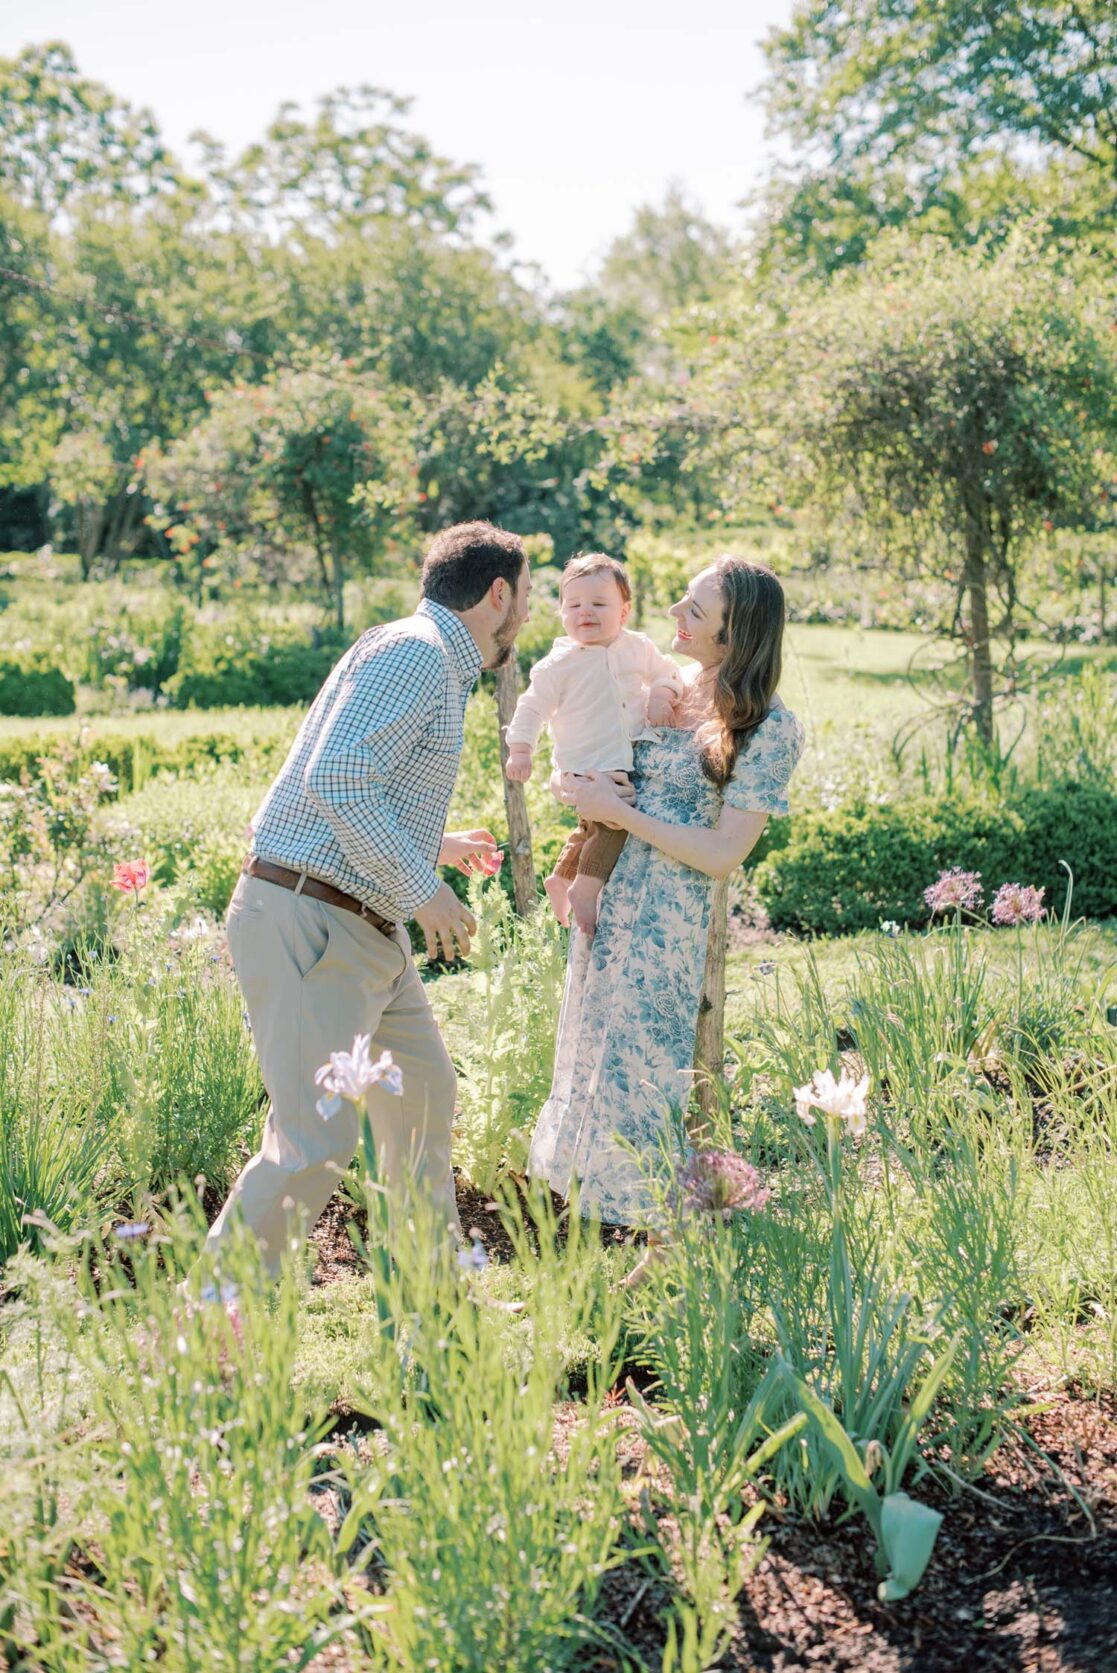 Photo of mom and dad playing with baby son in a garden by Richmond baby photographer Jacqueline Aimee Portraits